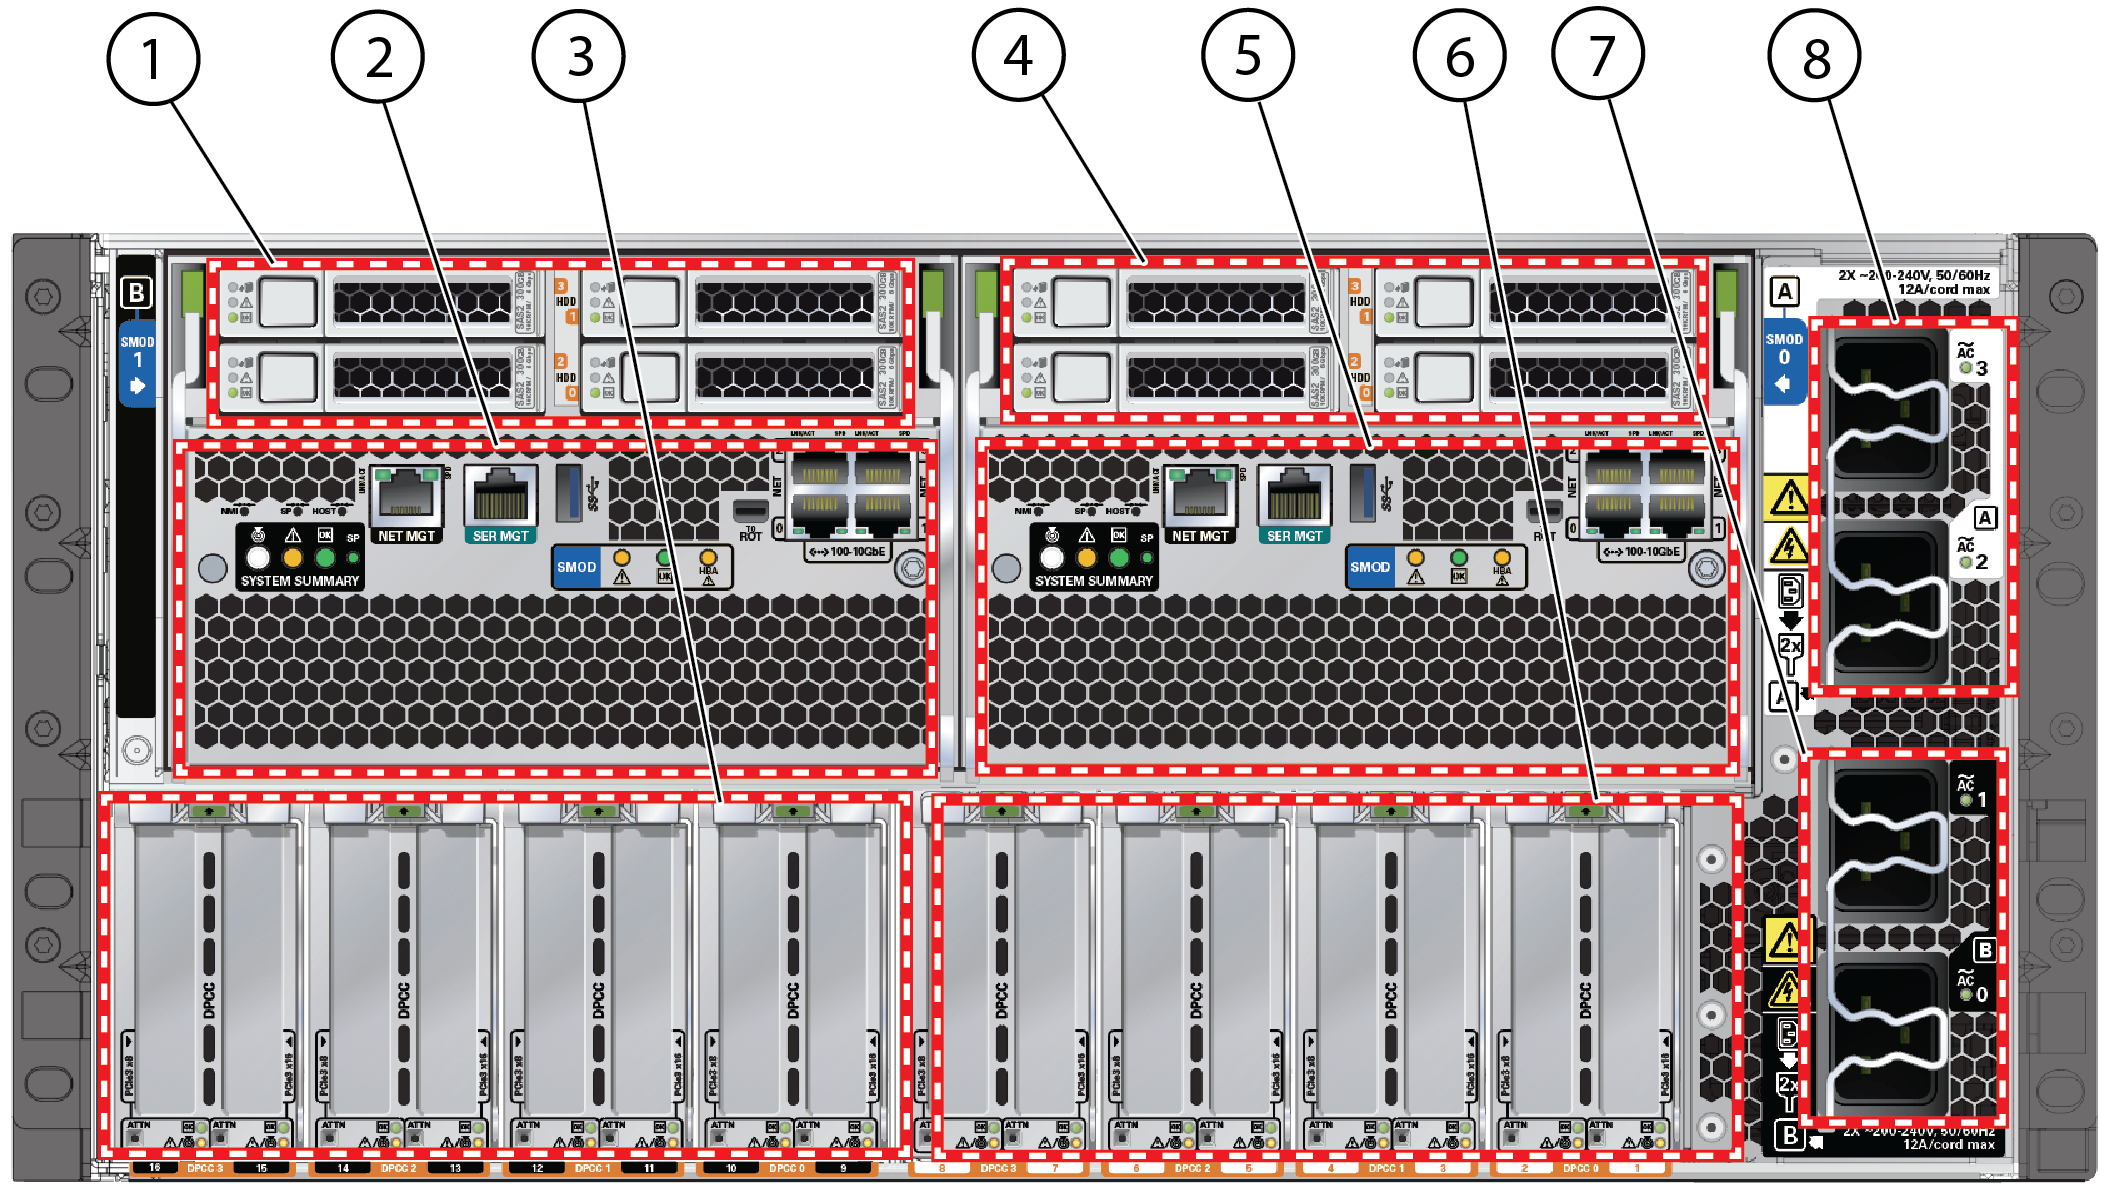 Back Panel Features - Oracle® Server X8-8 Installation Guide